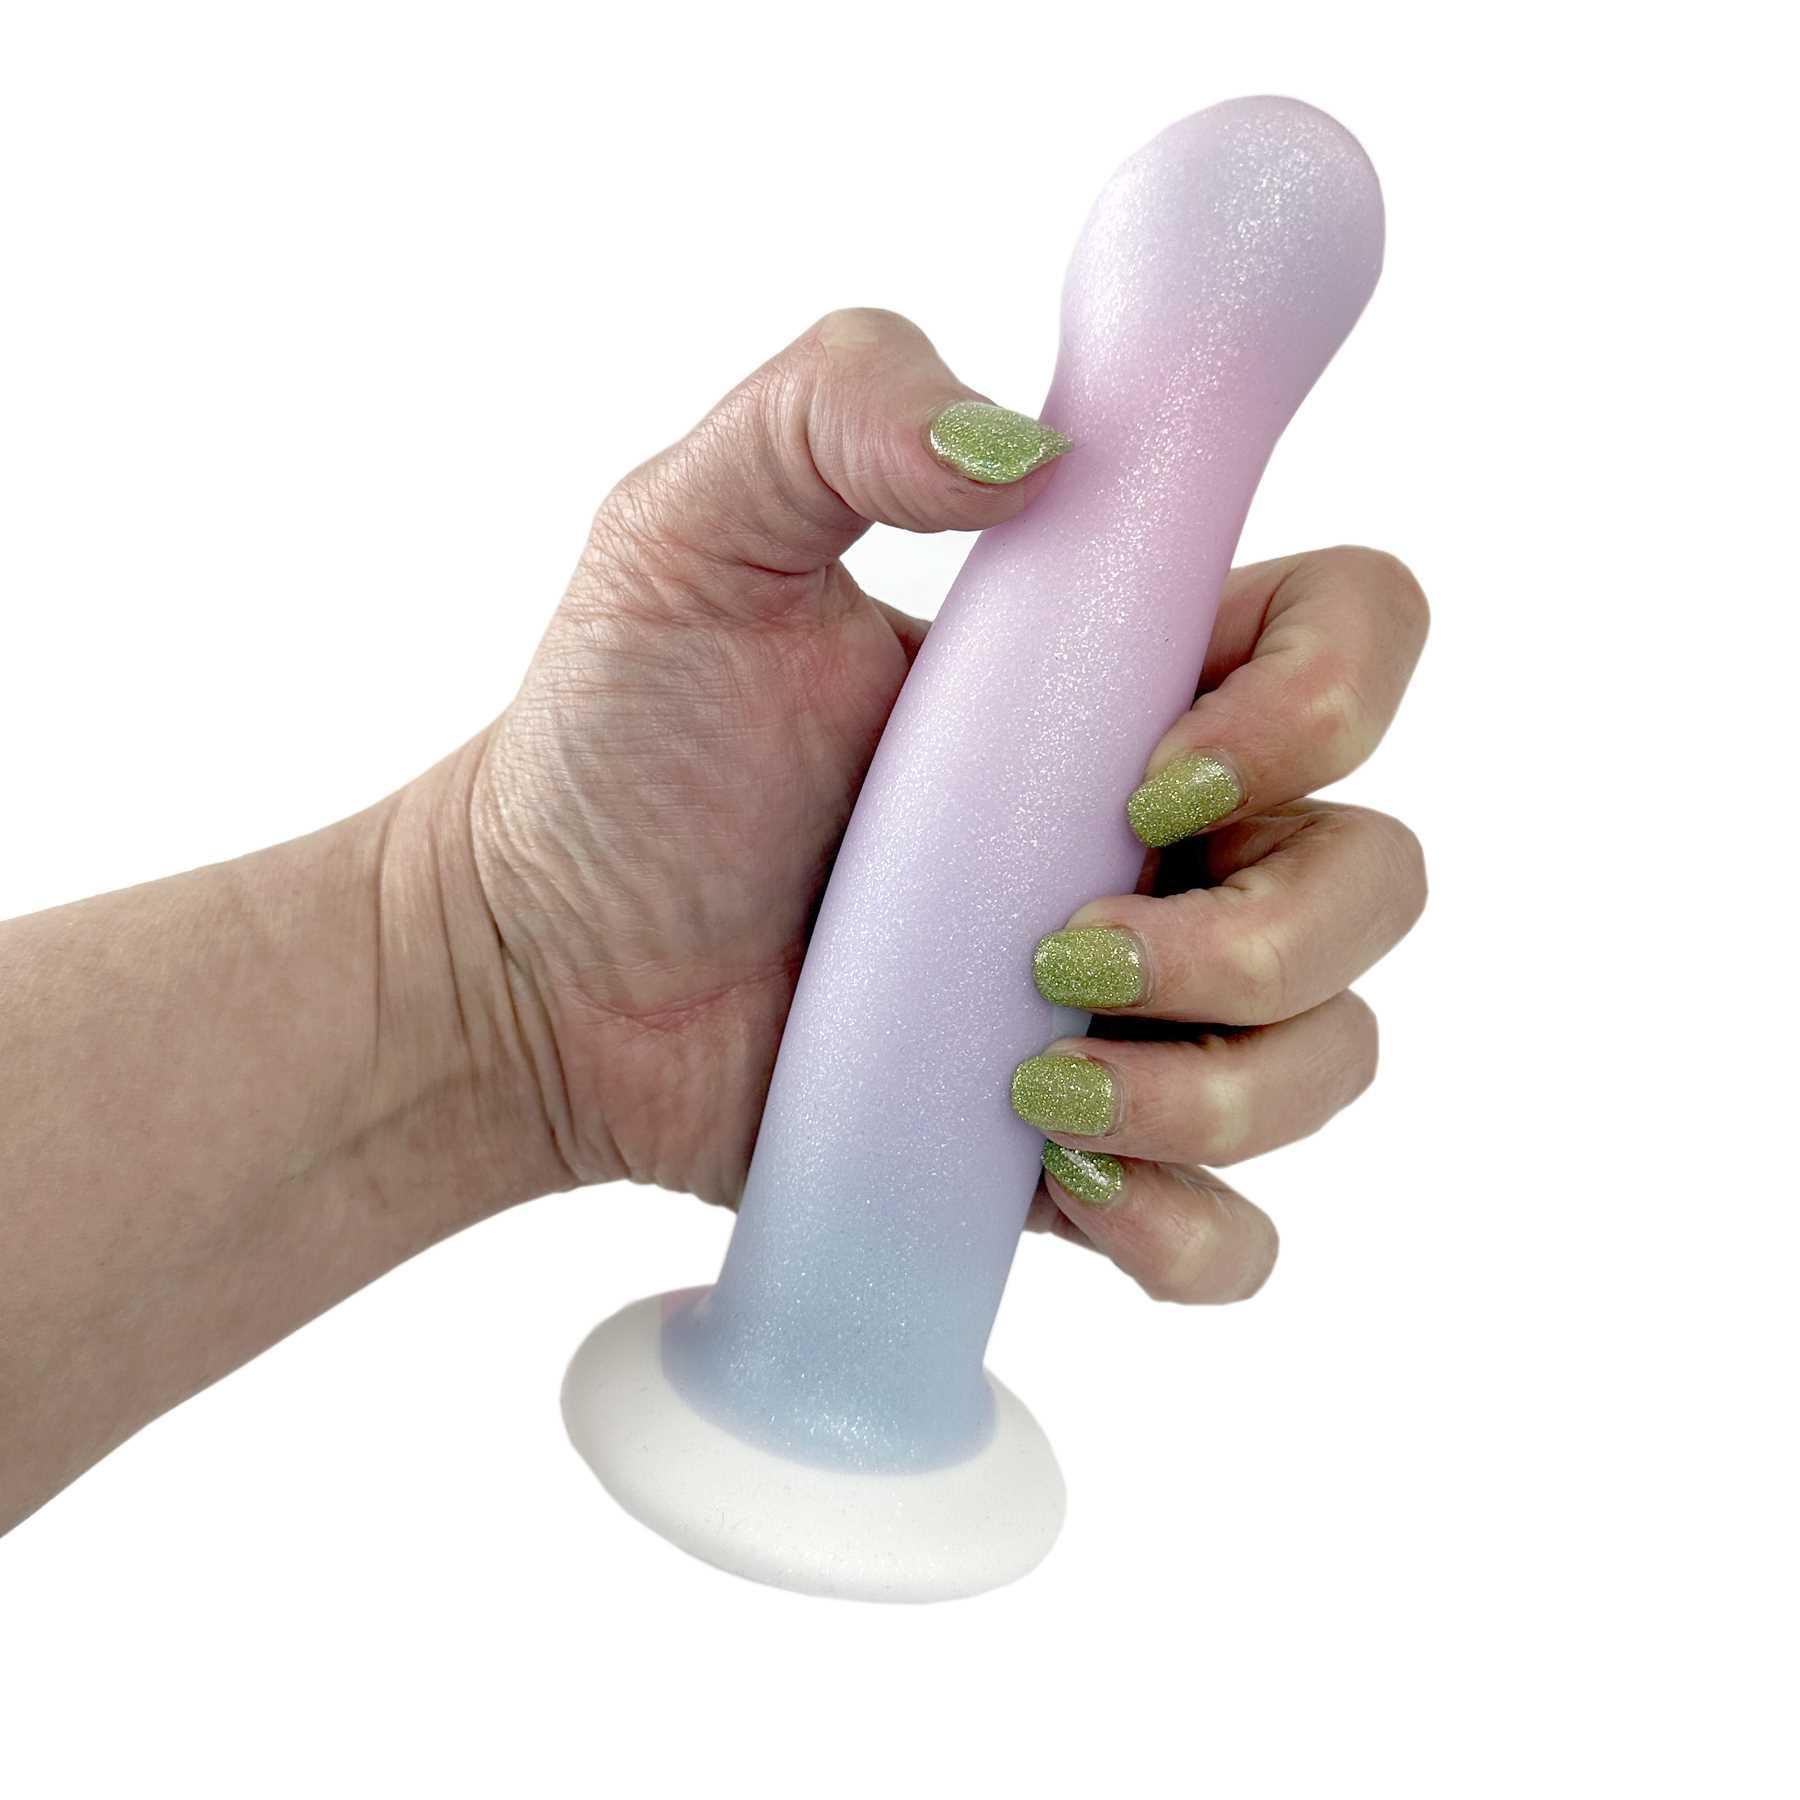 Cotton Candy Pixie Dix 6.5 Silicone Dildo hand held